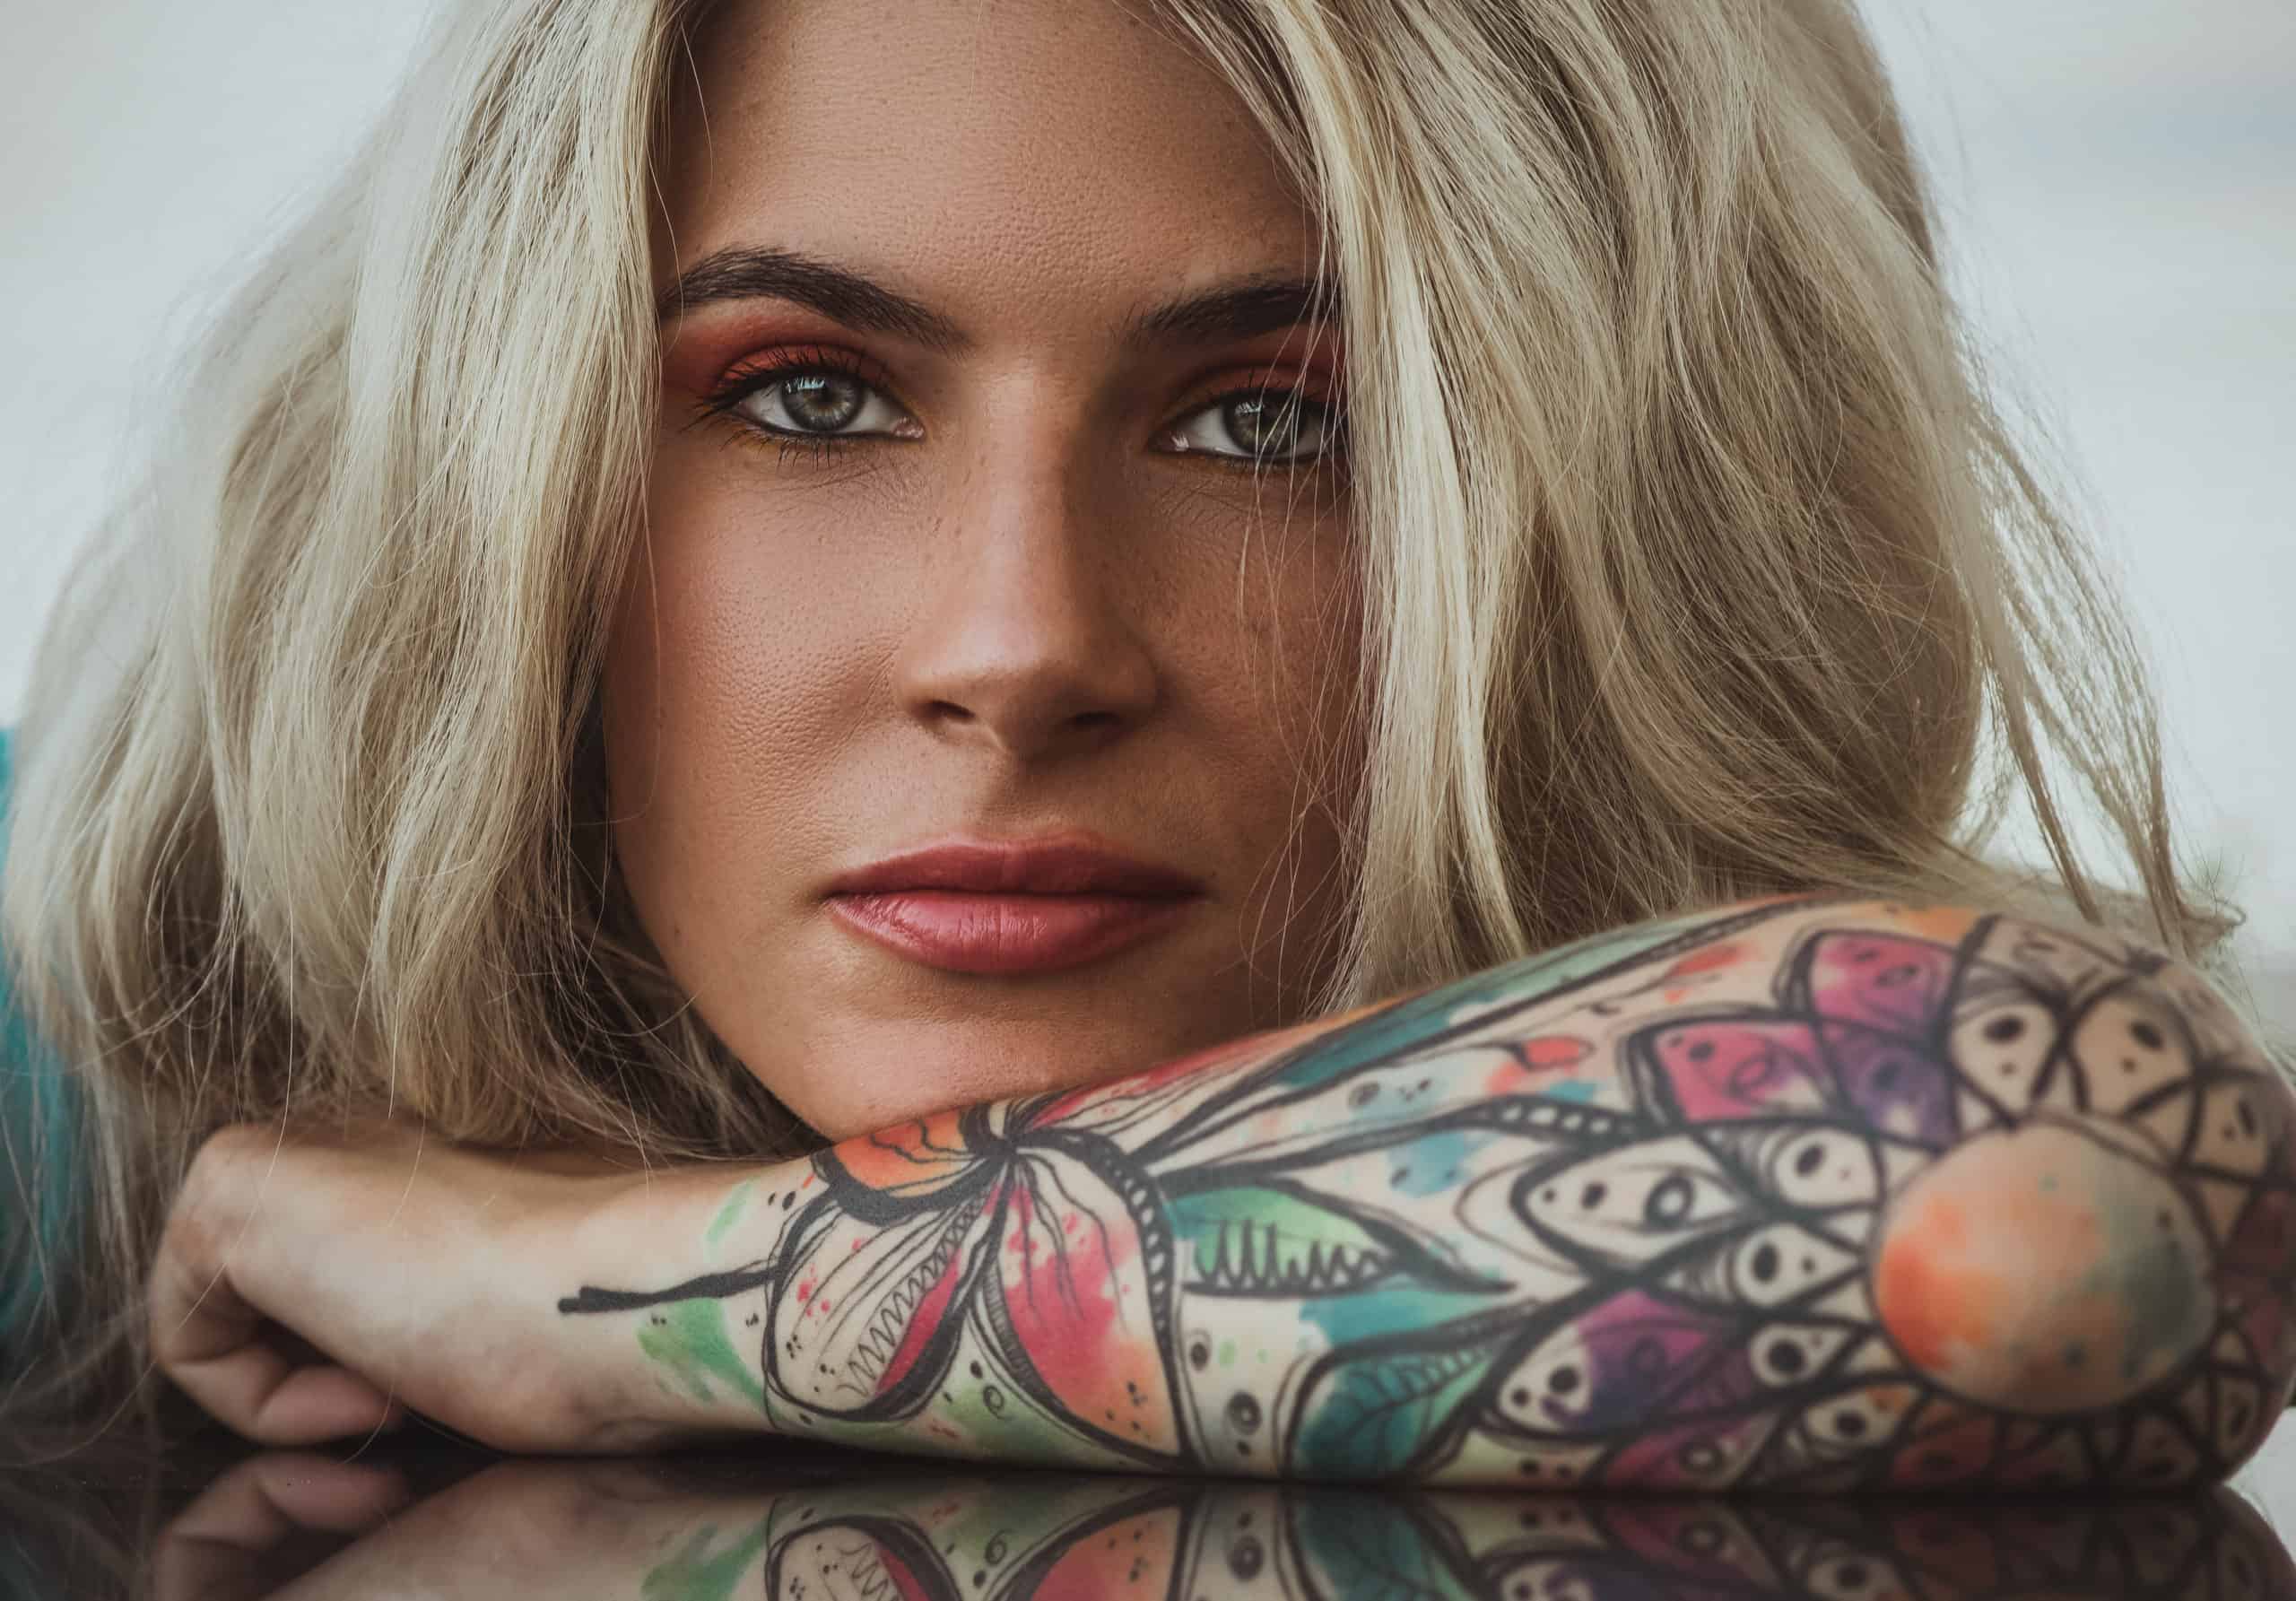 Shocking Tattoo Laws in Countries that Limit or Ban Tattoos